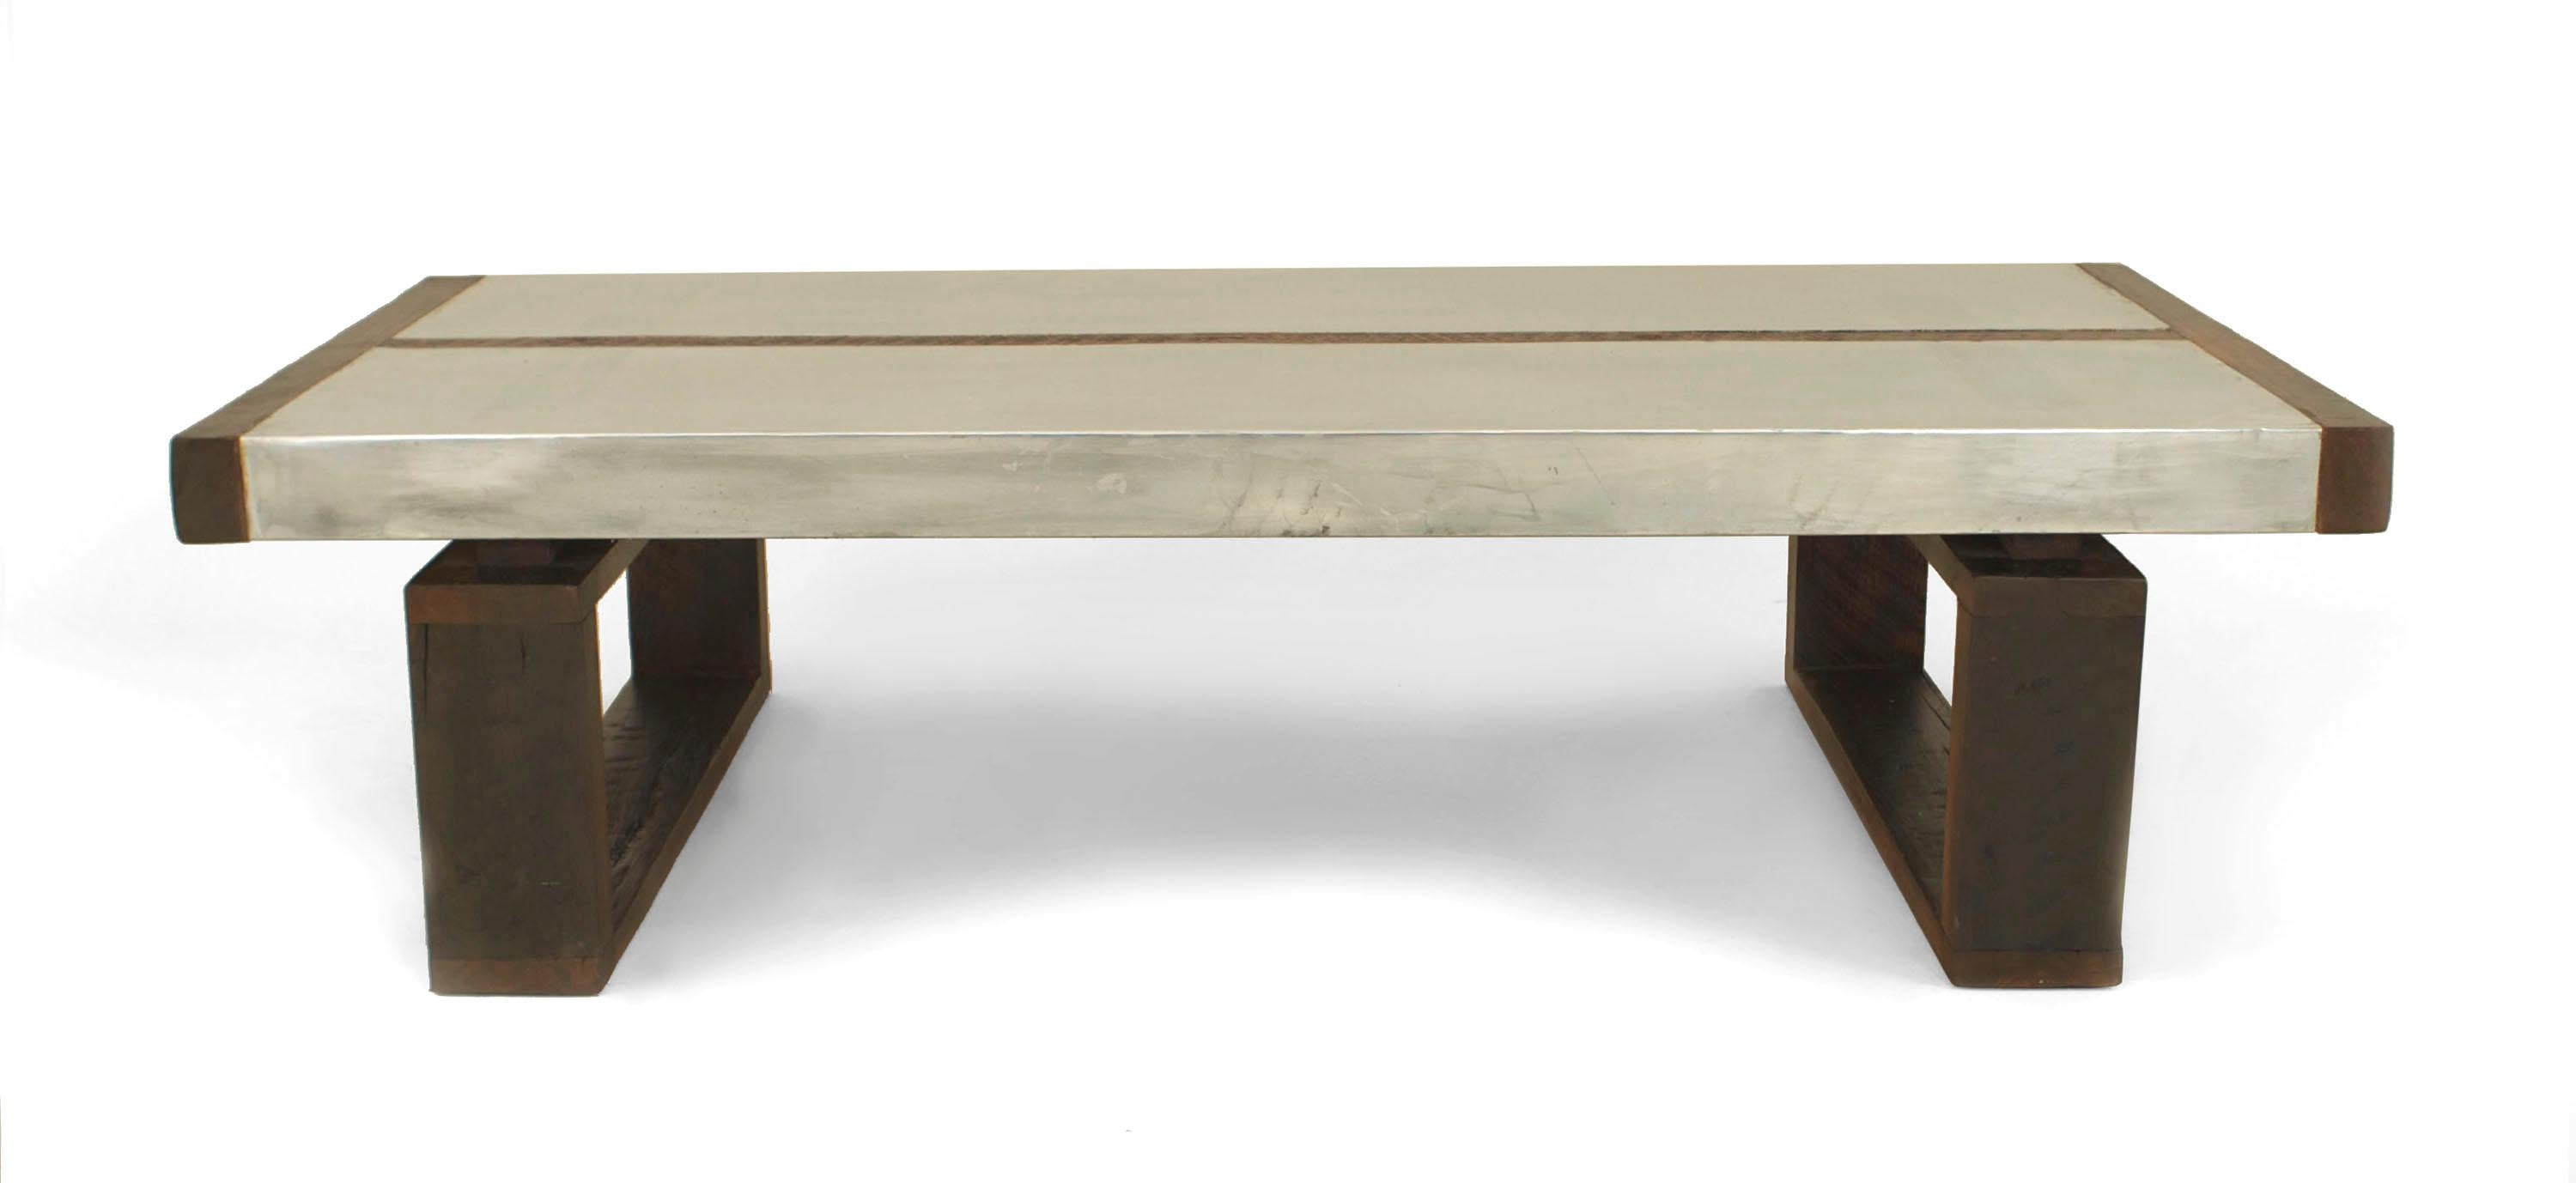 Art Deco style rectangular coffee table with stained oak sides and a top with a center strip separating two metal panels resting on two open pedestal base sides.
 